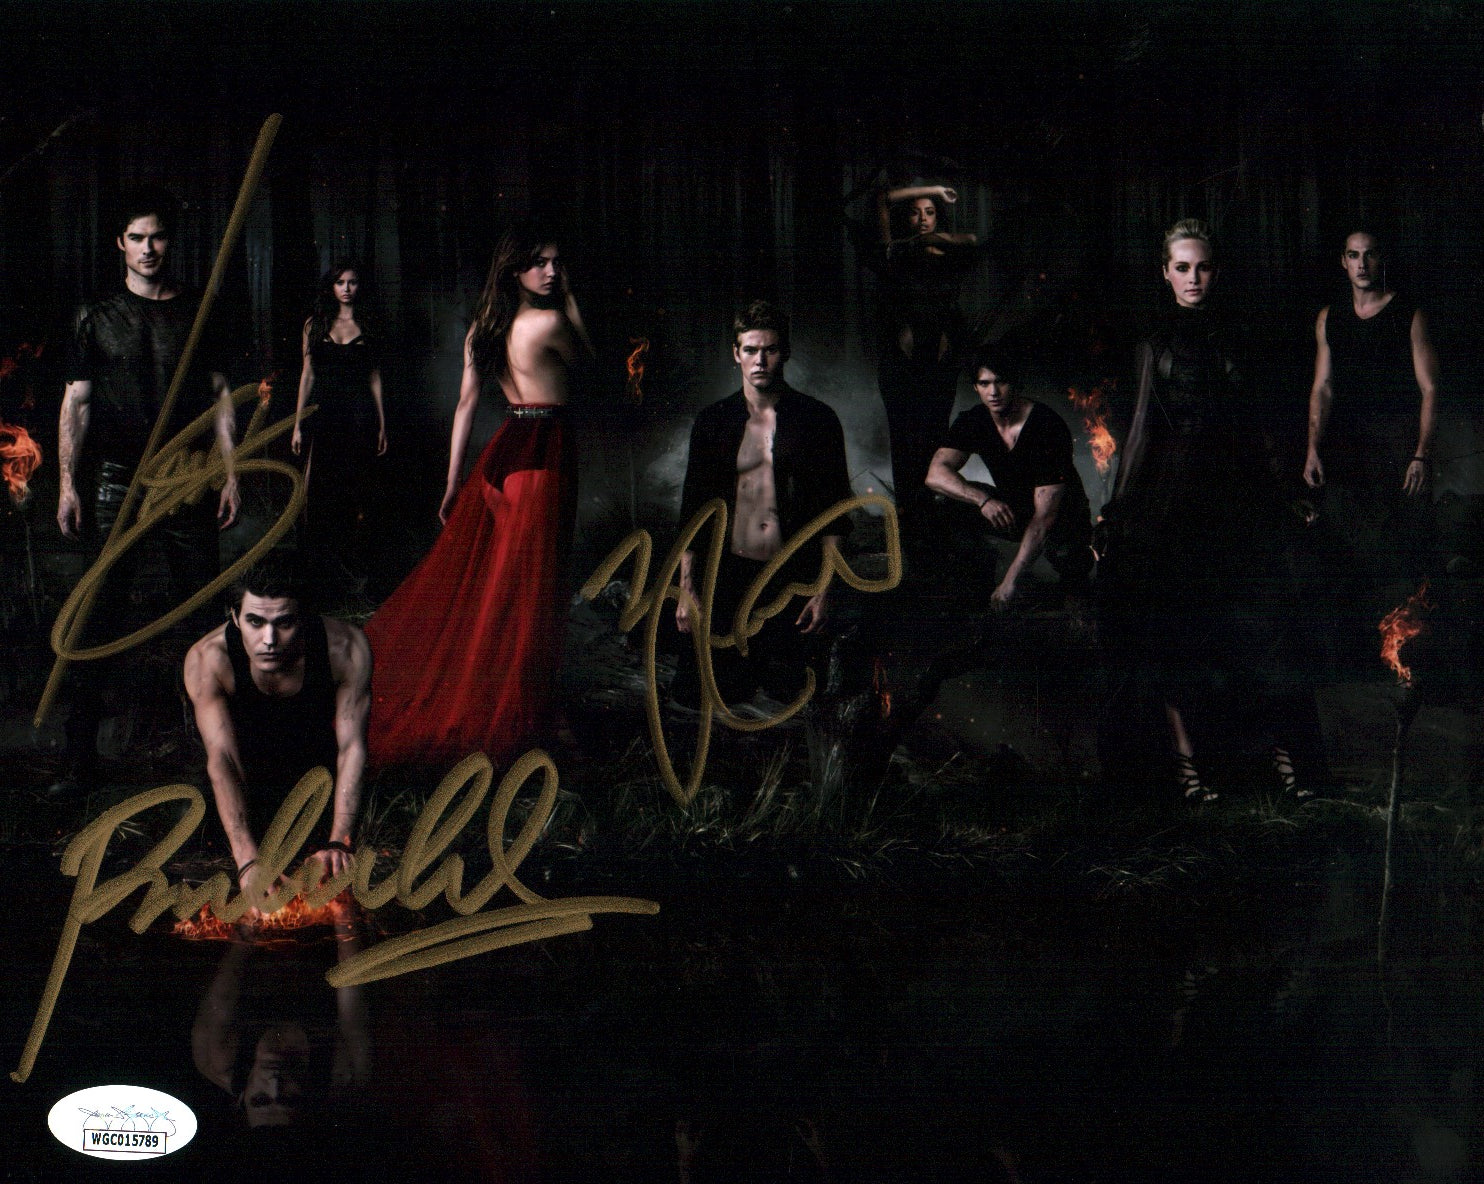 The Vampire Diaries 8x10 Photo Cast x3 Signed Roerig, Wesely, Somerhalder  JSA Certified Autograph